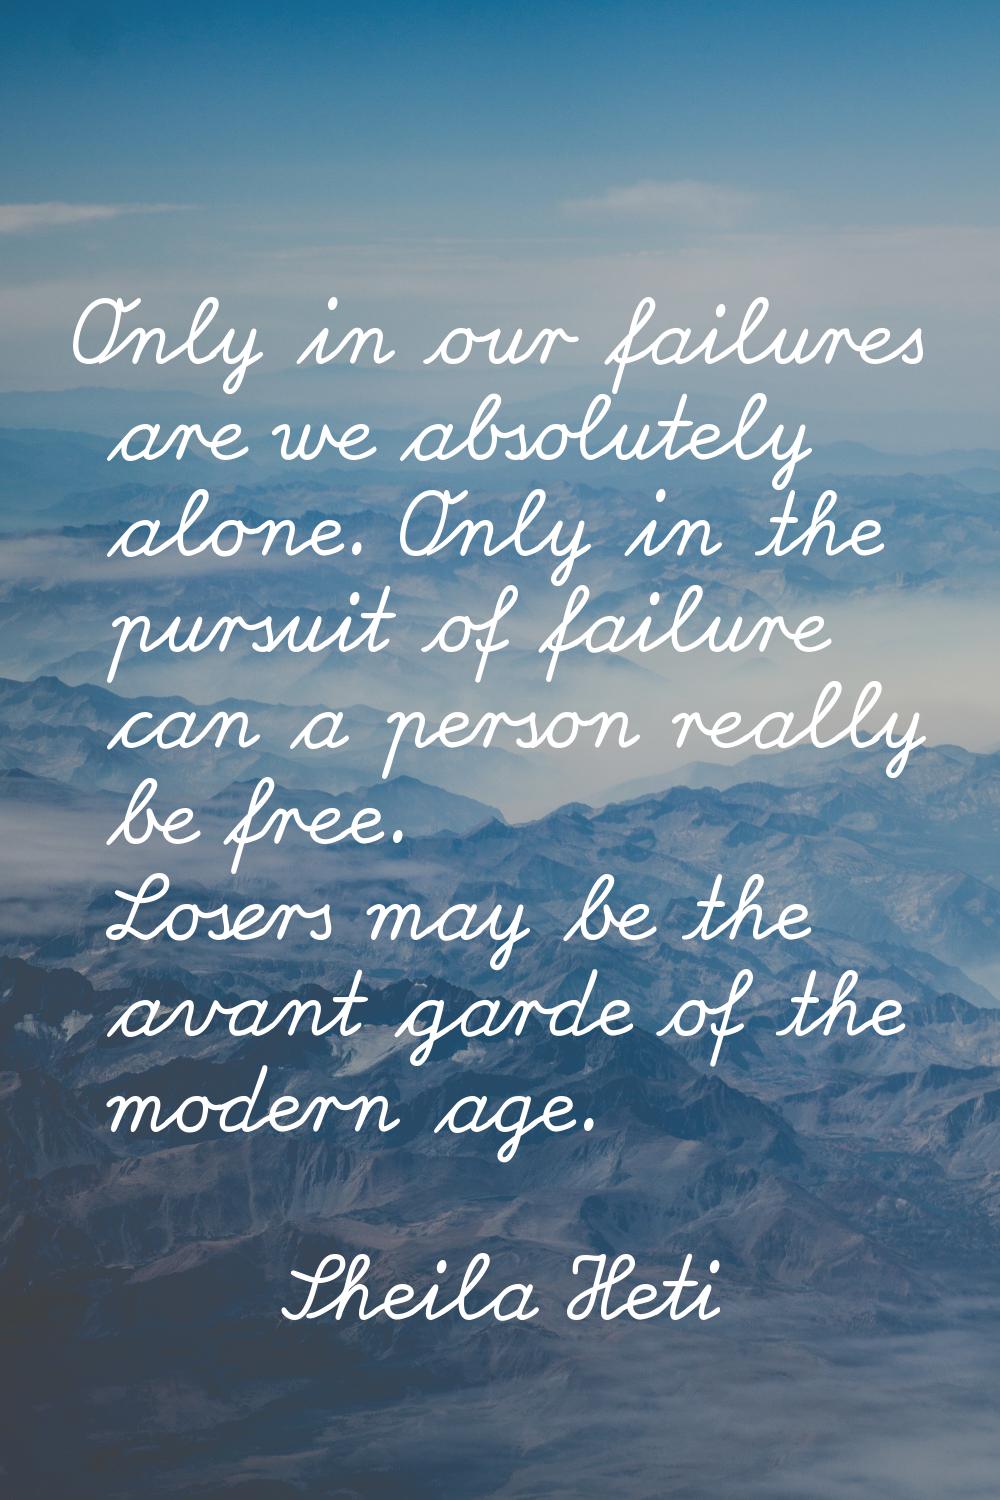 Only in our failures are we absolutely alone. Only in the pursuit of failure can a person really be